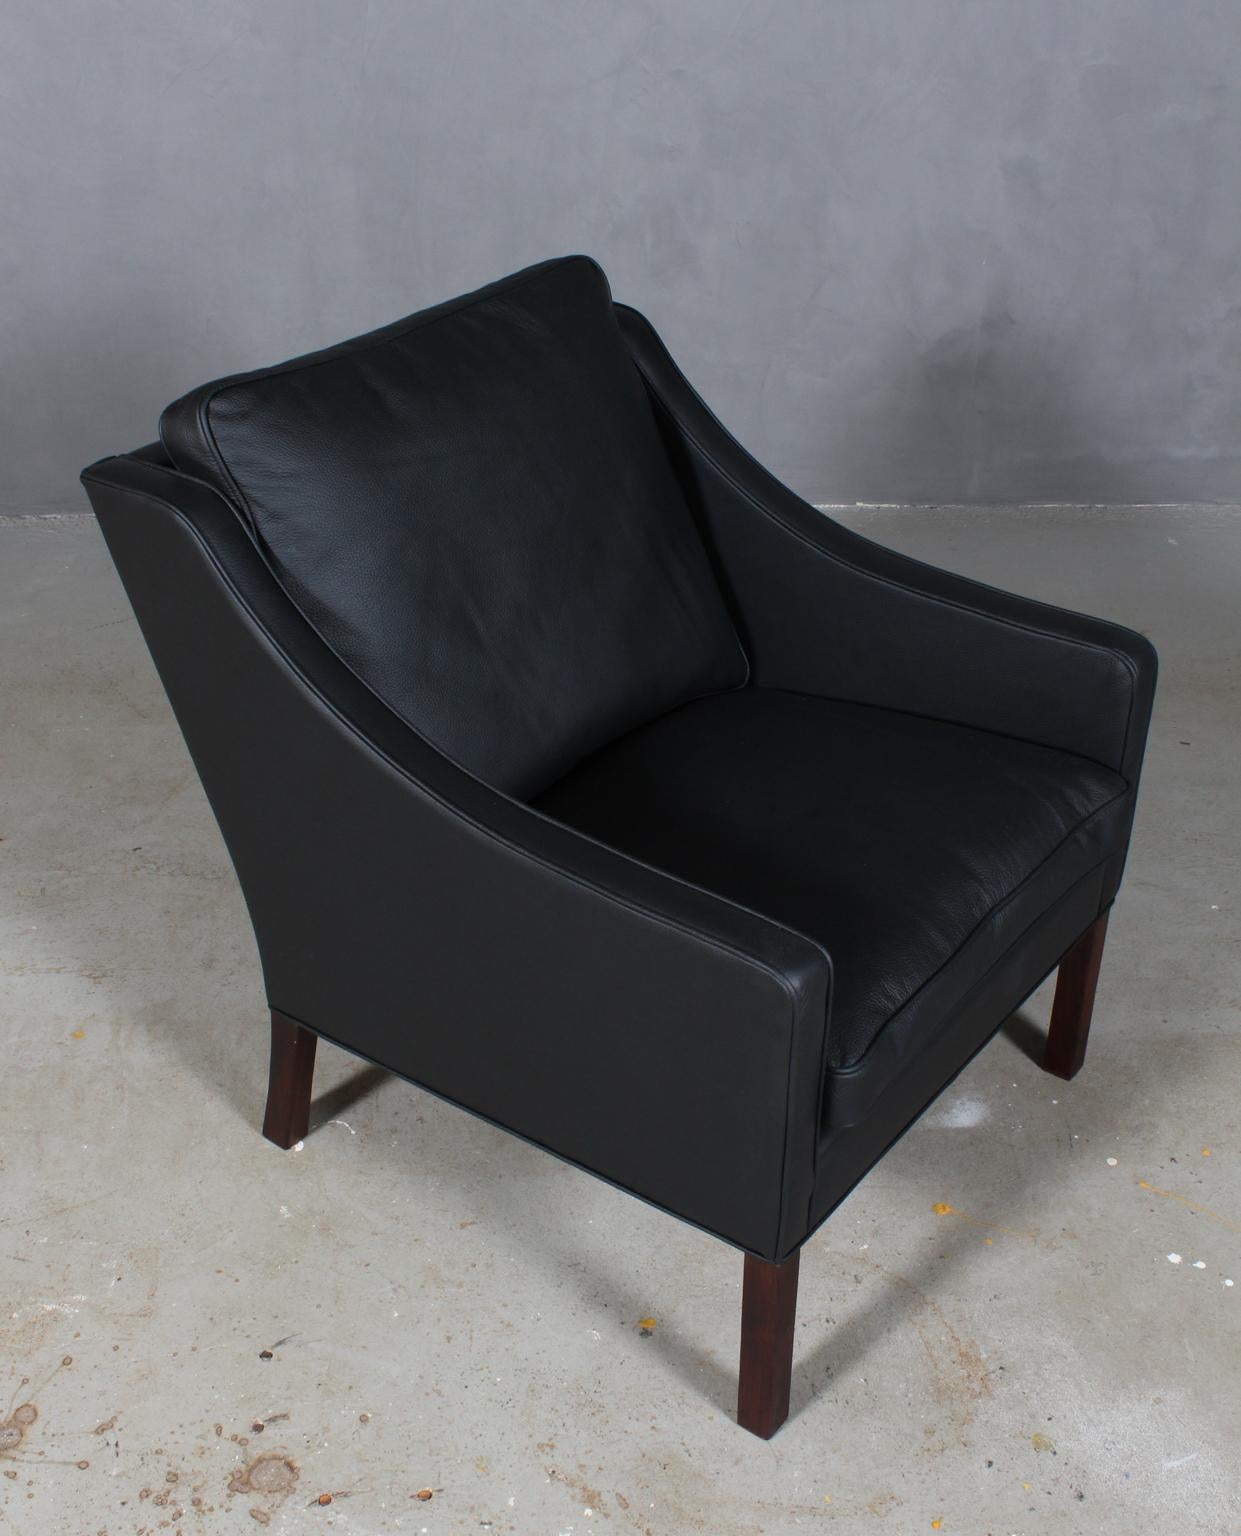 Børge Mogensen lounge chair new upholstered with black leather

Legs of mahogany.

Model 2207, made by Fredericia furniture.